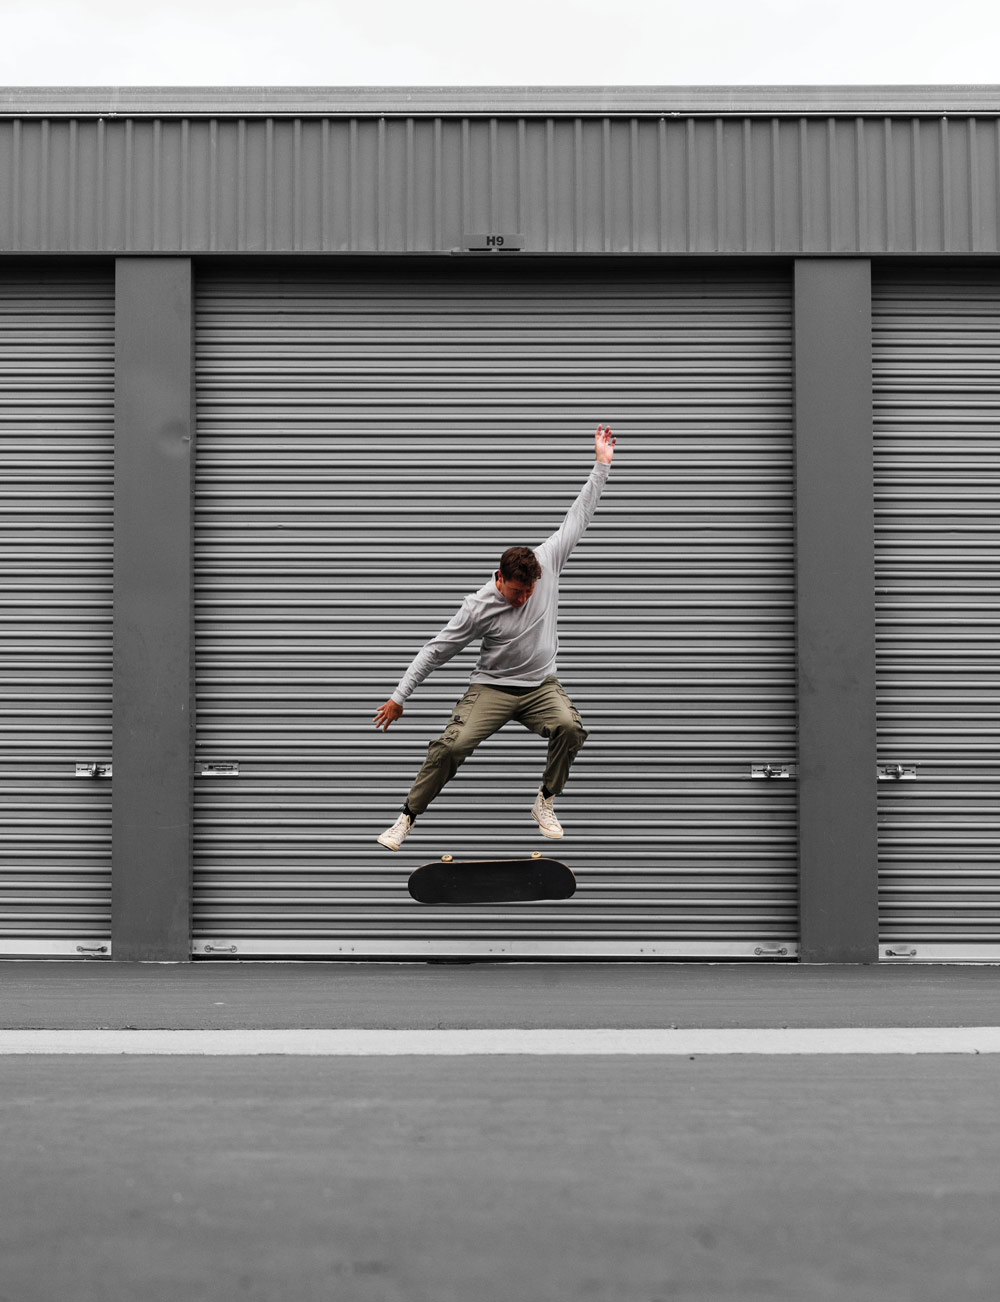 Mikey Taylor doing a flip trick on his skateboard in front of a storage unit door